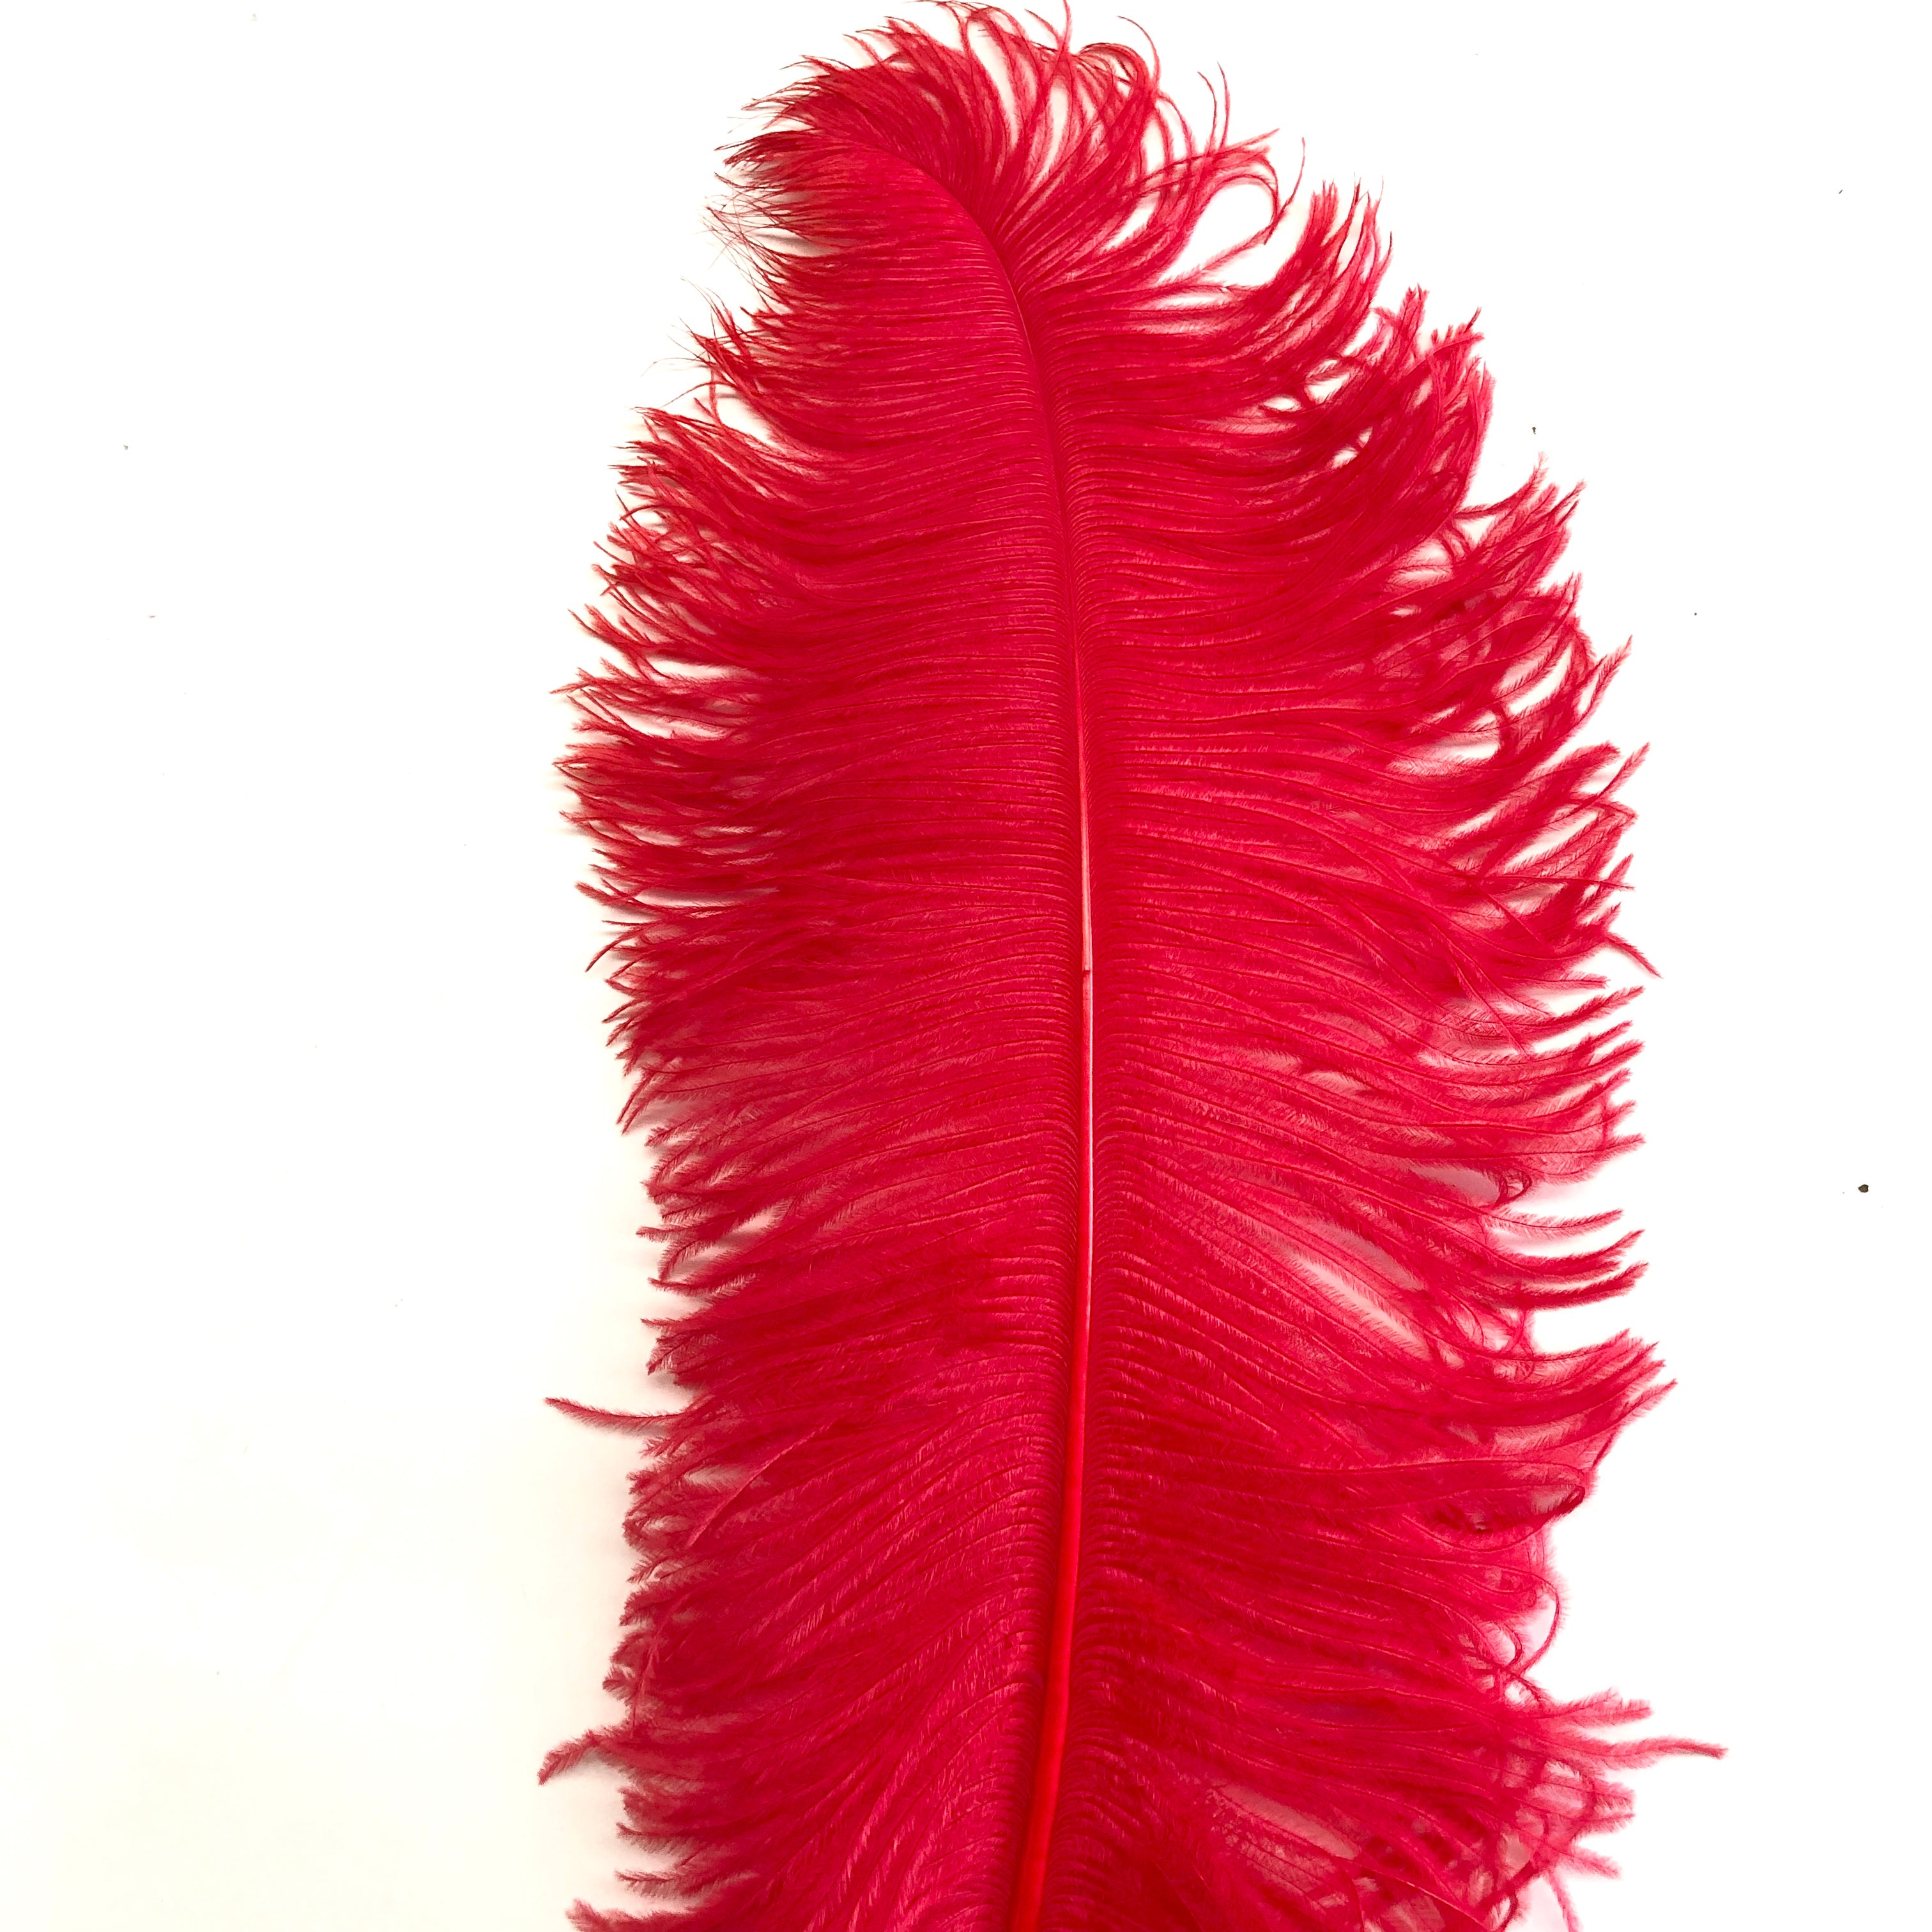 Ostrich Wing Feather Plumes 60-65cm (24-26") - Red ((SECONDS))